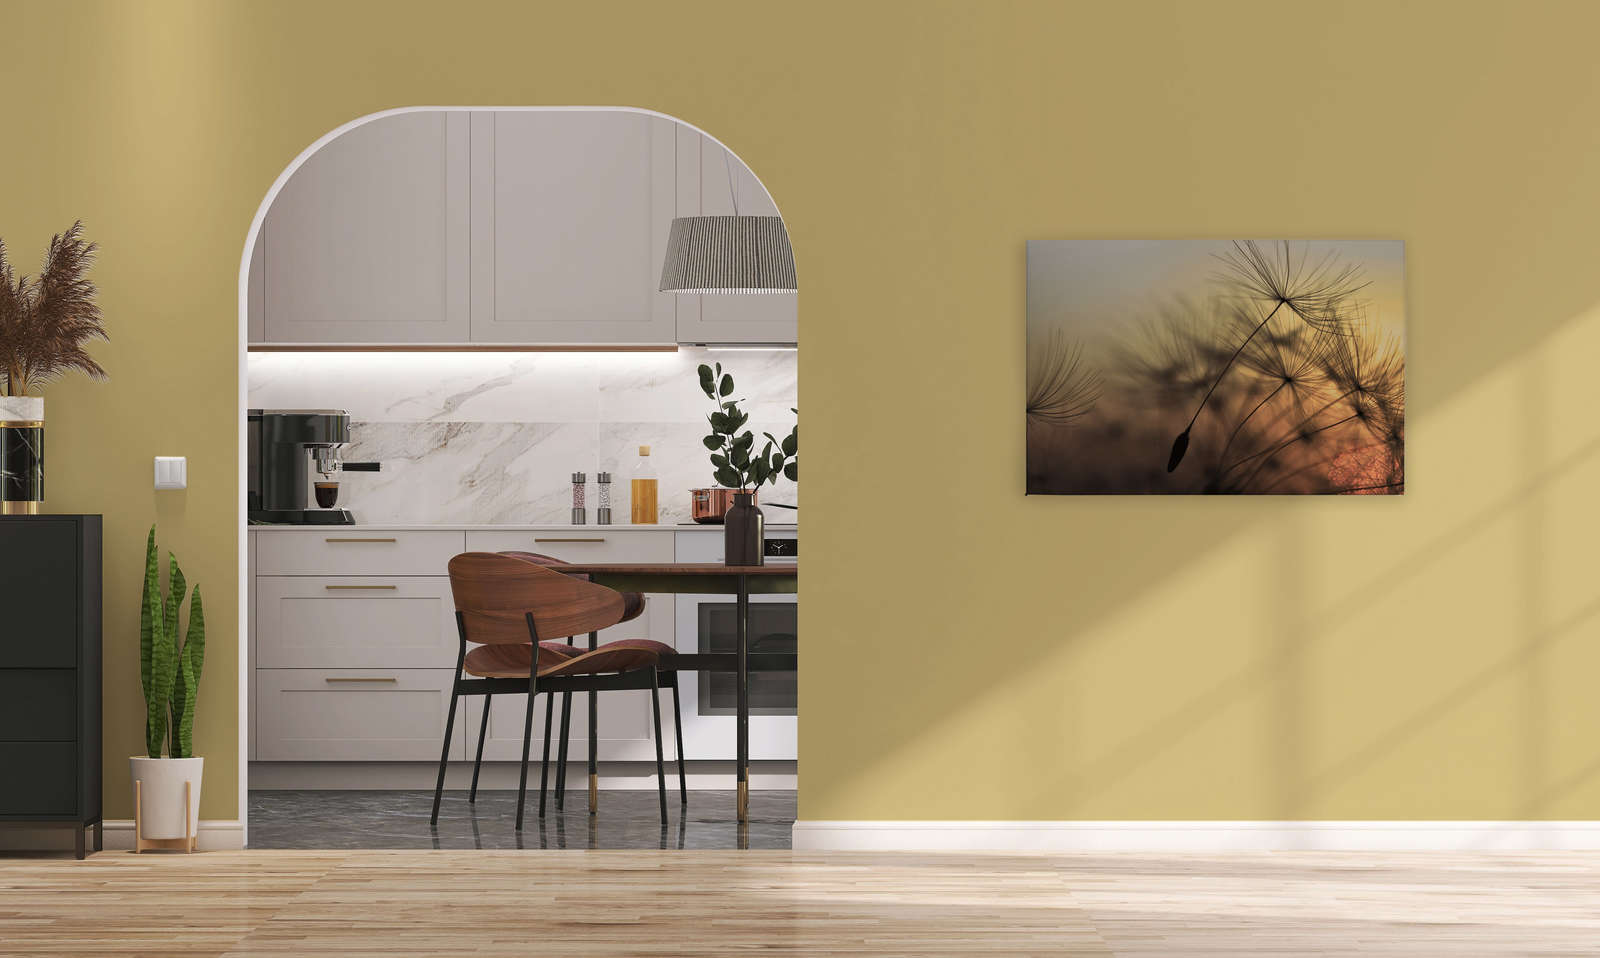             Canvas with flying dandelion in sunset - 0.90 m x 0.60 m
        